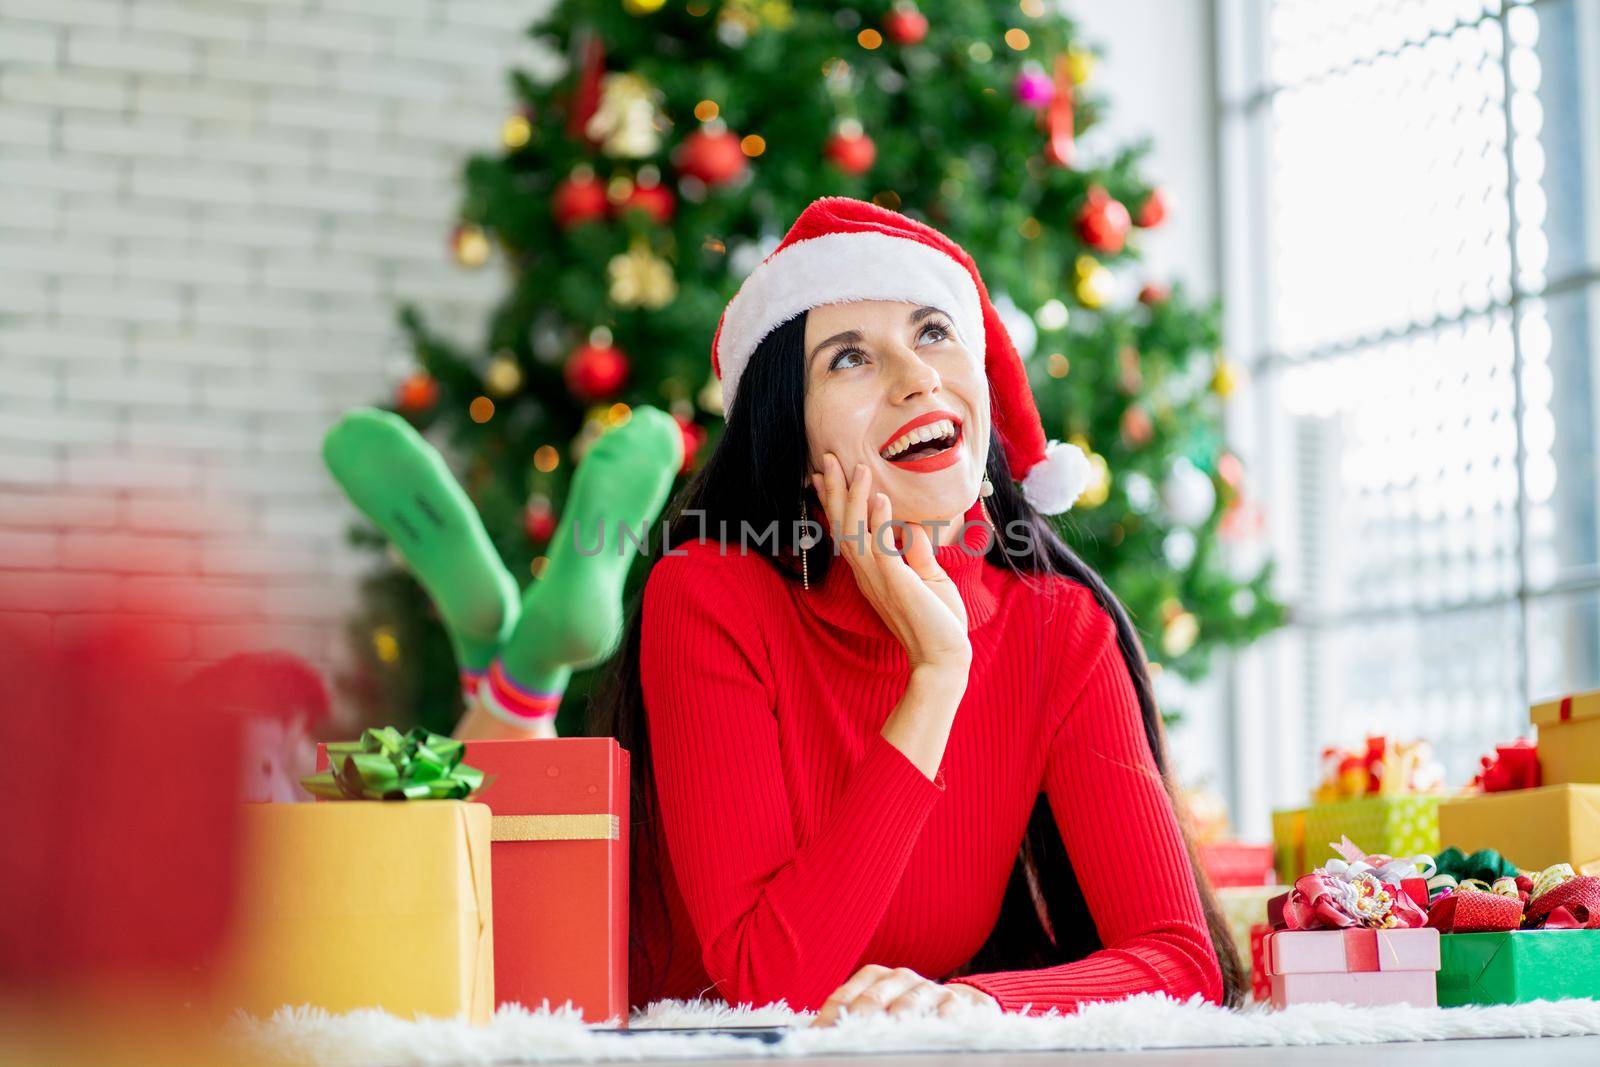 Pretty woman with Christmas costume lie on floor and look up on right side with smiling like exciting with the present and Christmas tree as background. by nrradmin